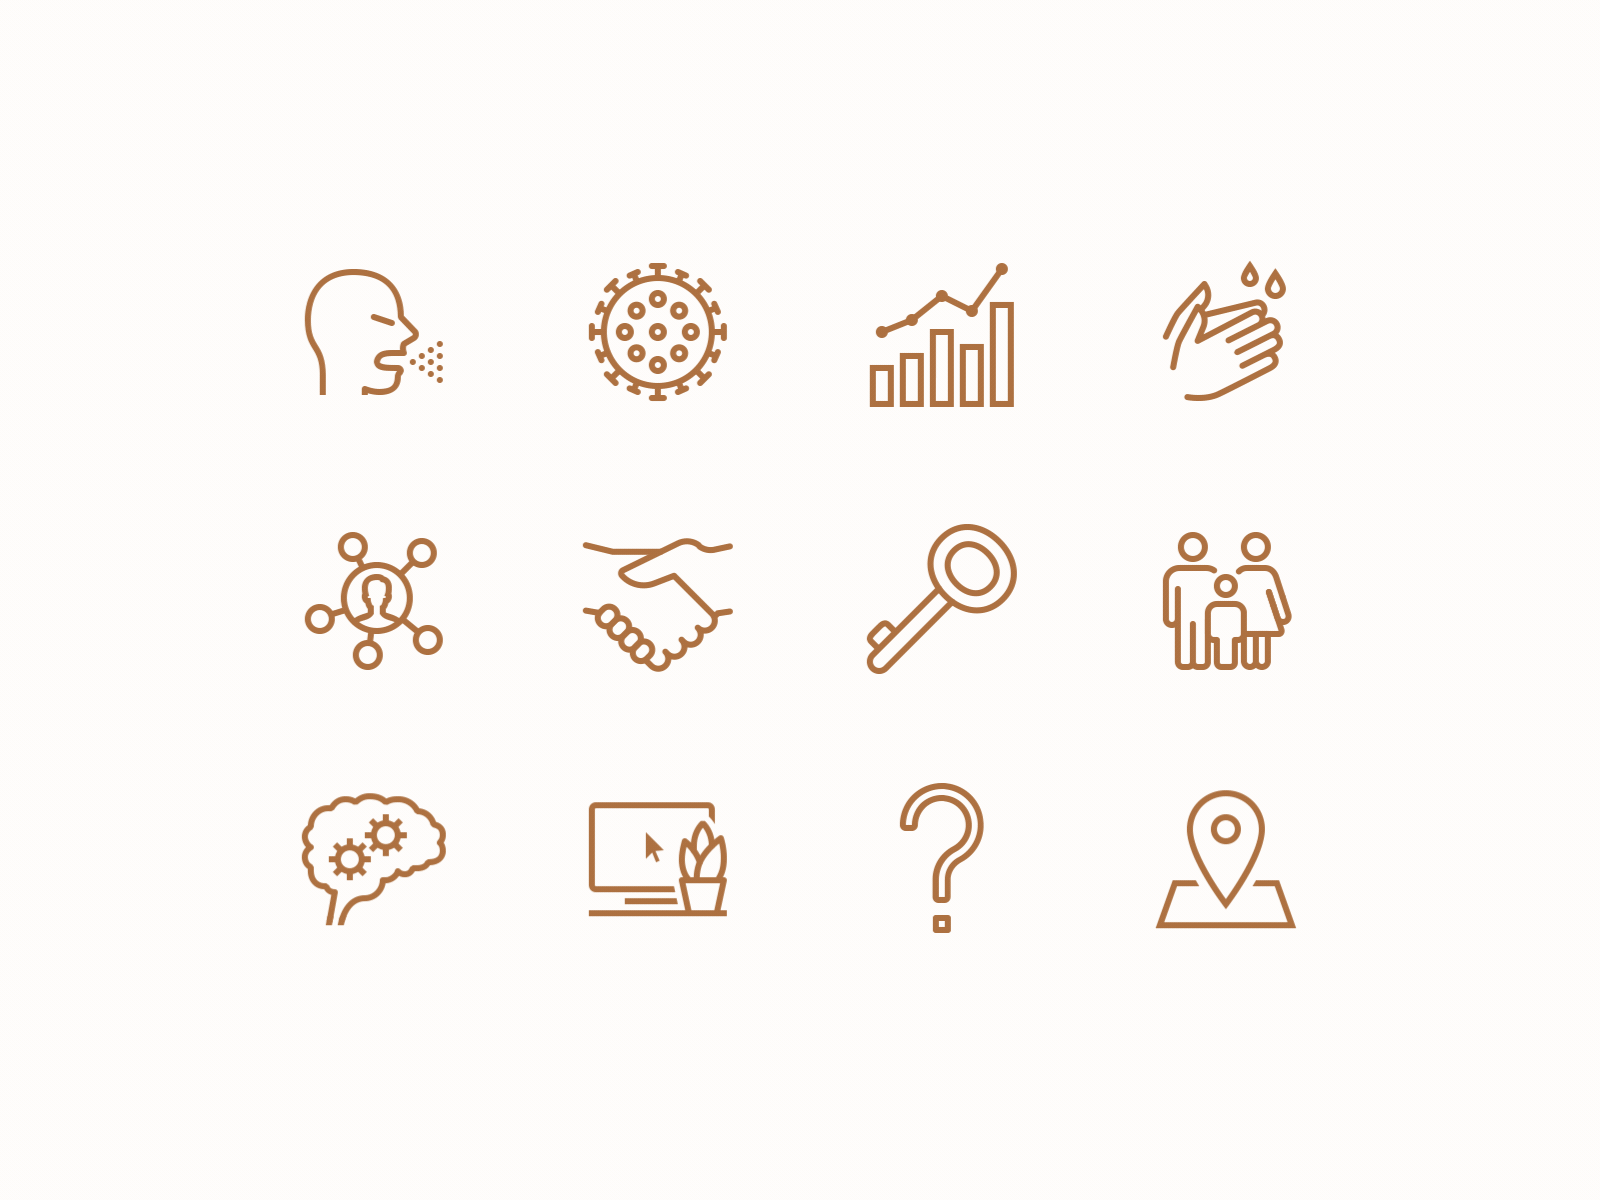 Pandemic Animated Icons By Margarita Ivanchikova For Icons8 On Dribbble